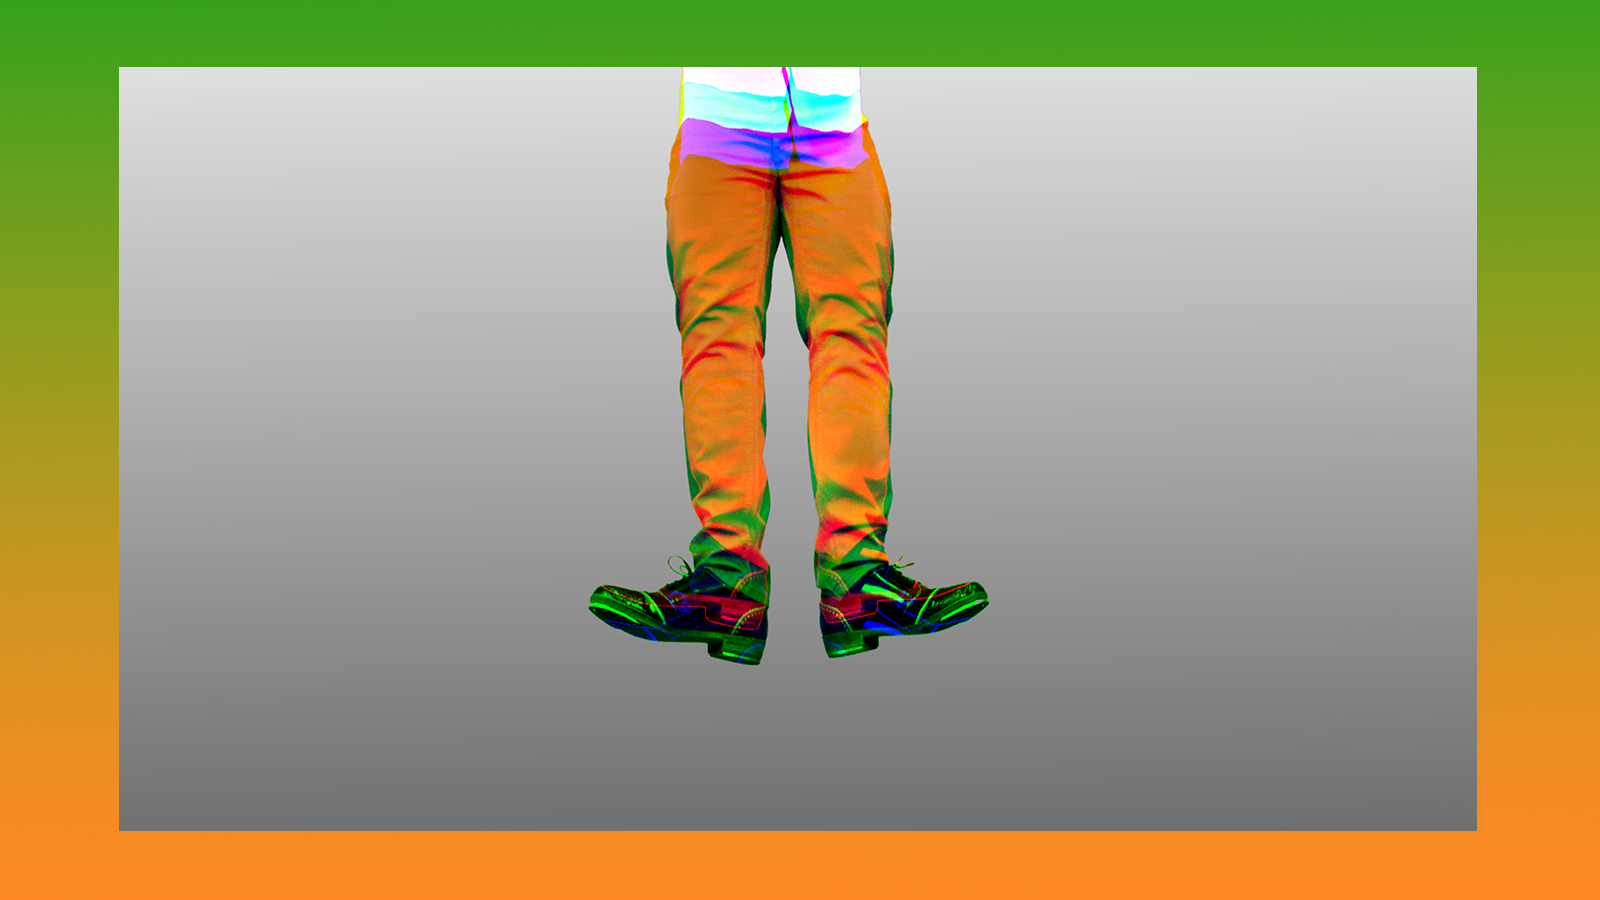 A pair of disembodied legs wearing colourful tap shoes.